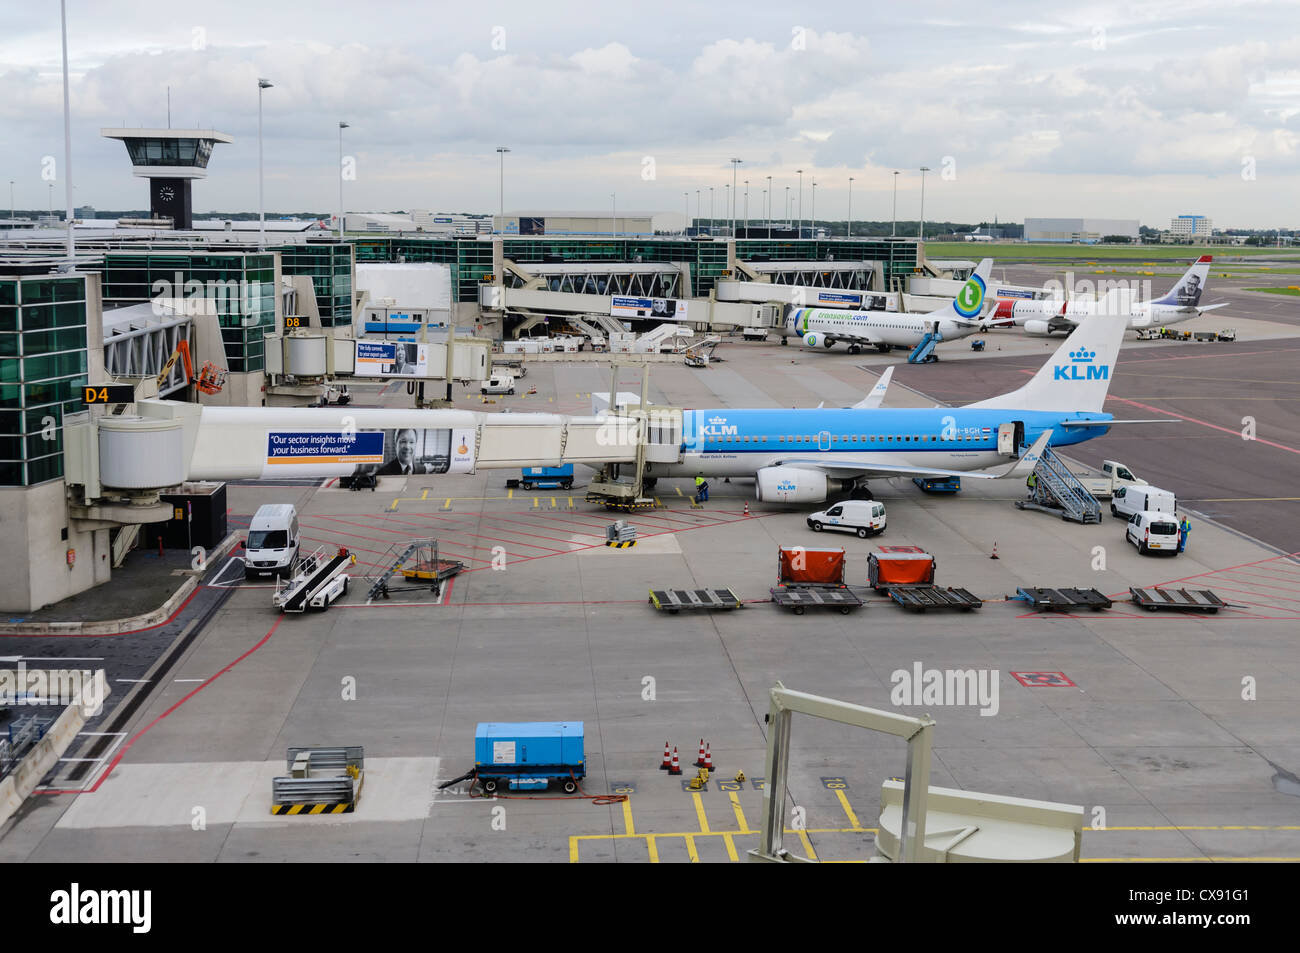 Air France KLM planes on the apron of Amsterdam Schiphol Airport with service vehicles Stock Photo